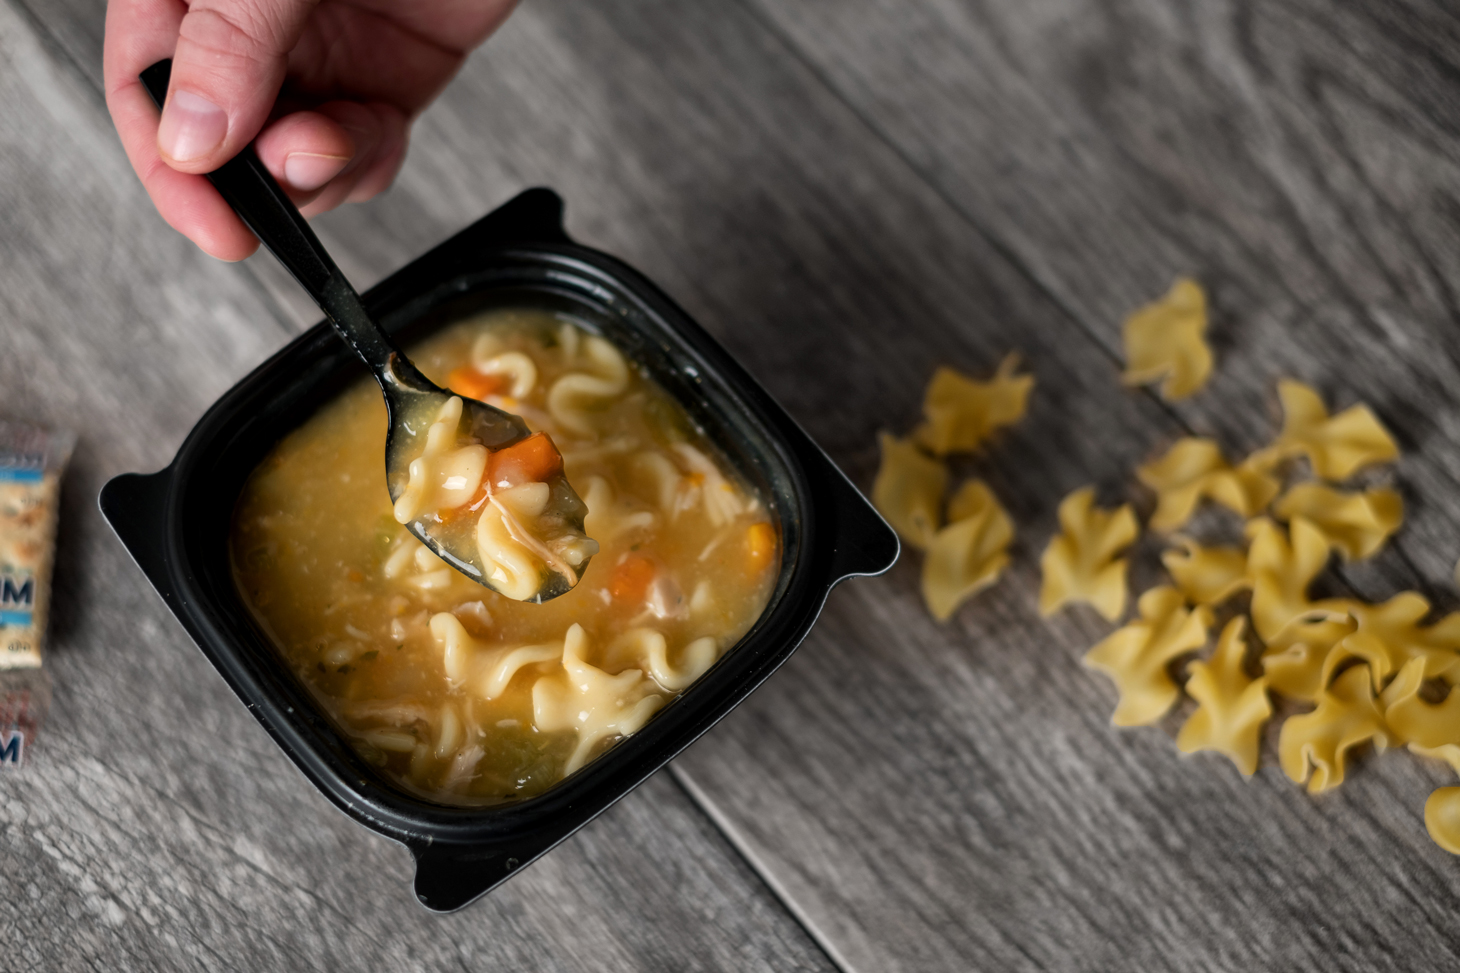 The history of Chick fil a chicken noodle soup